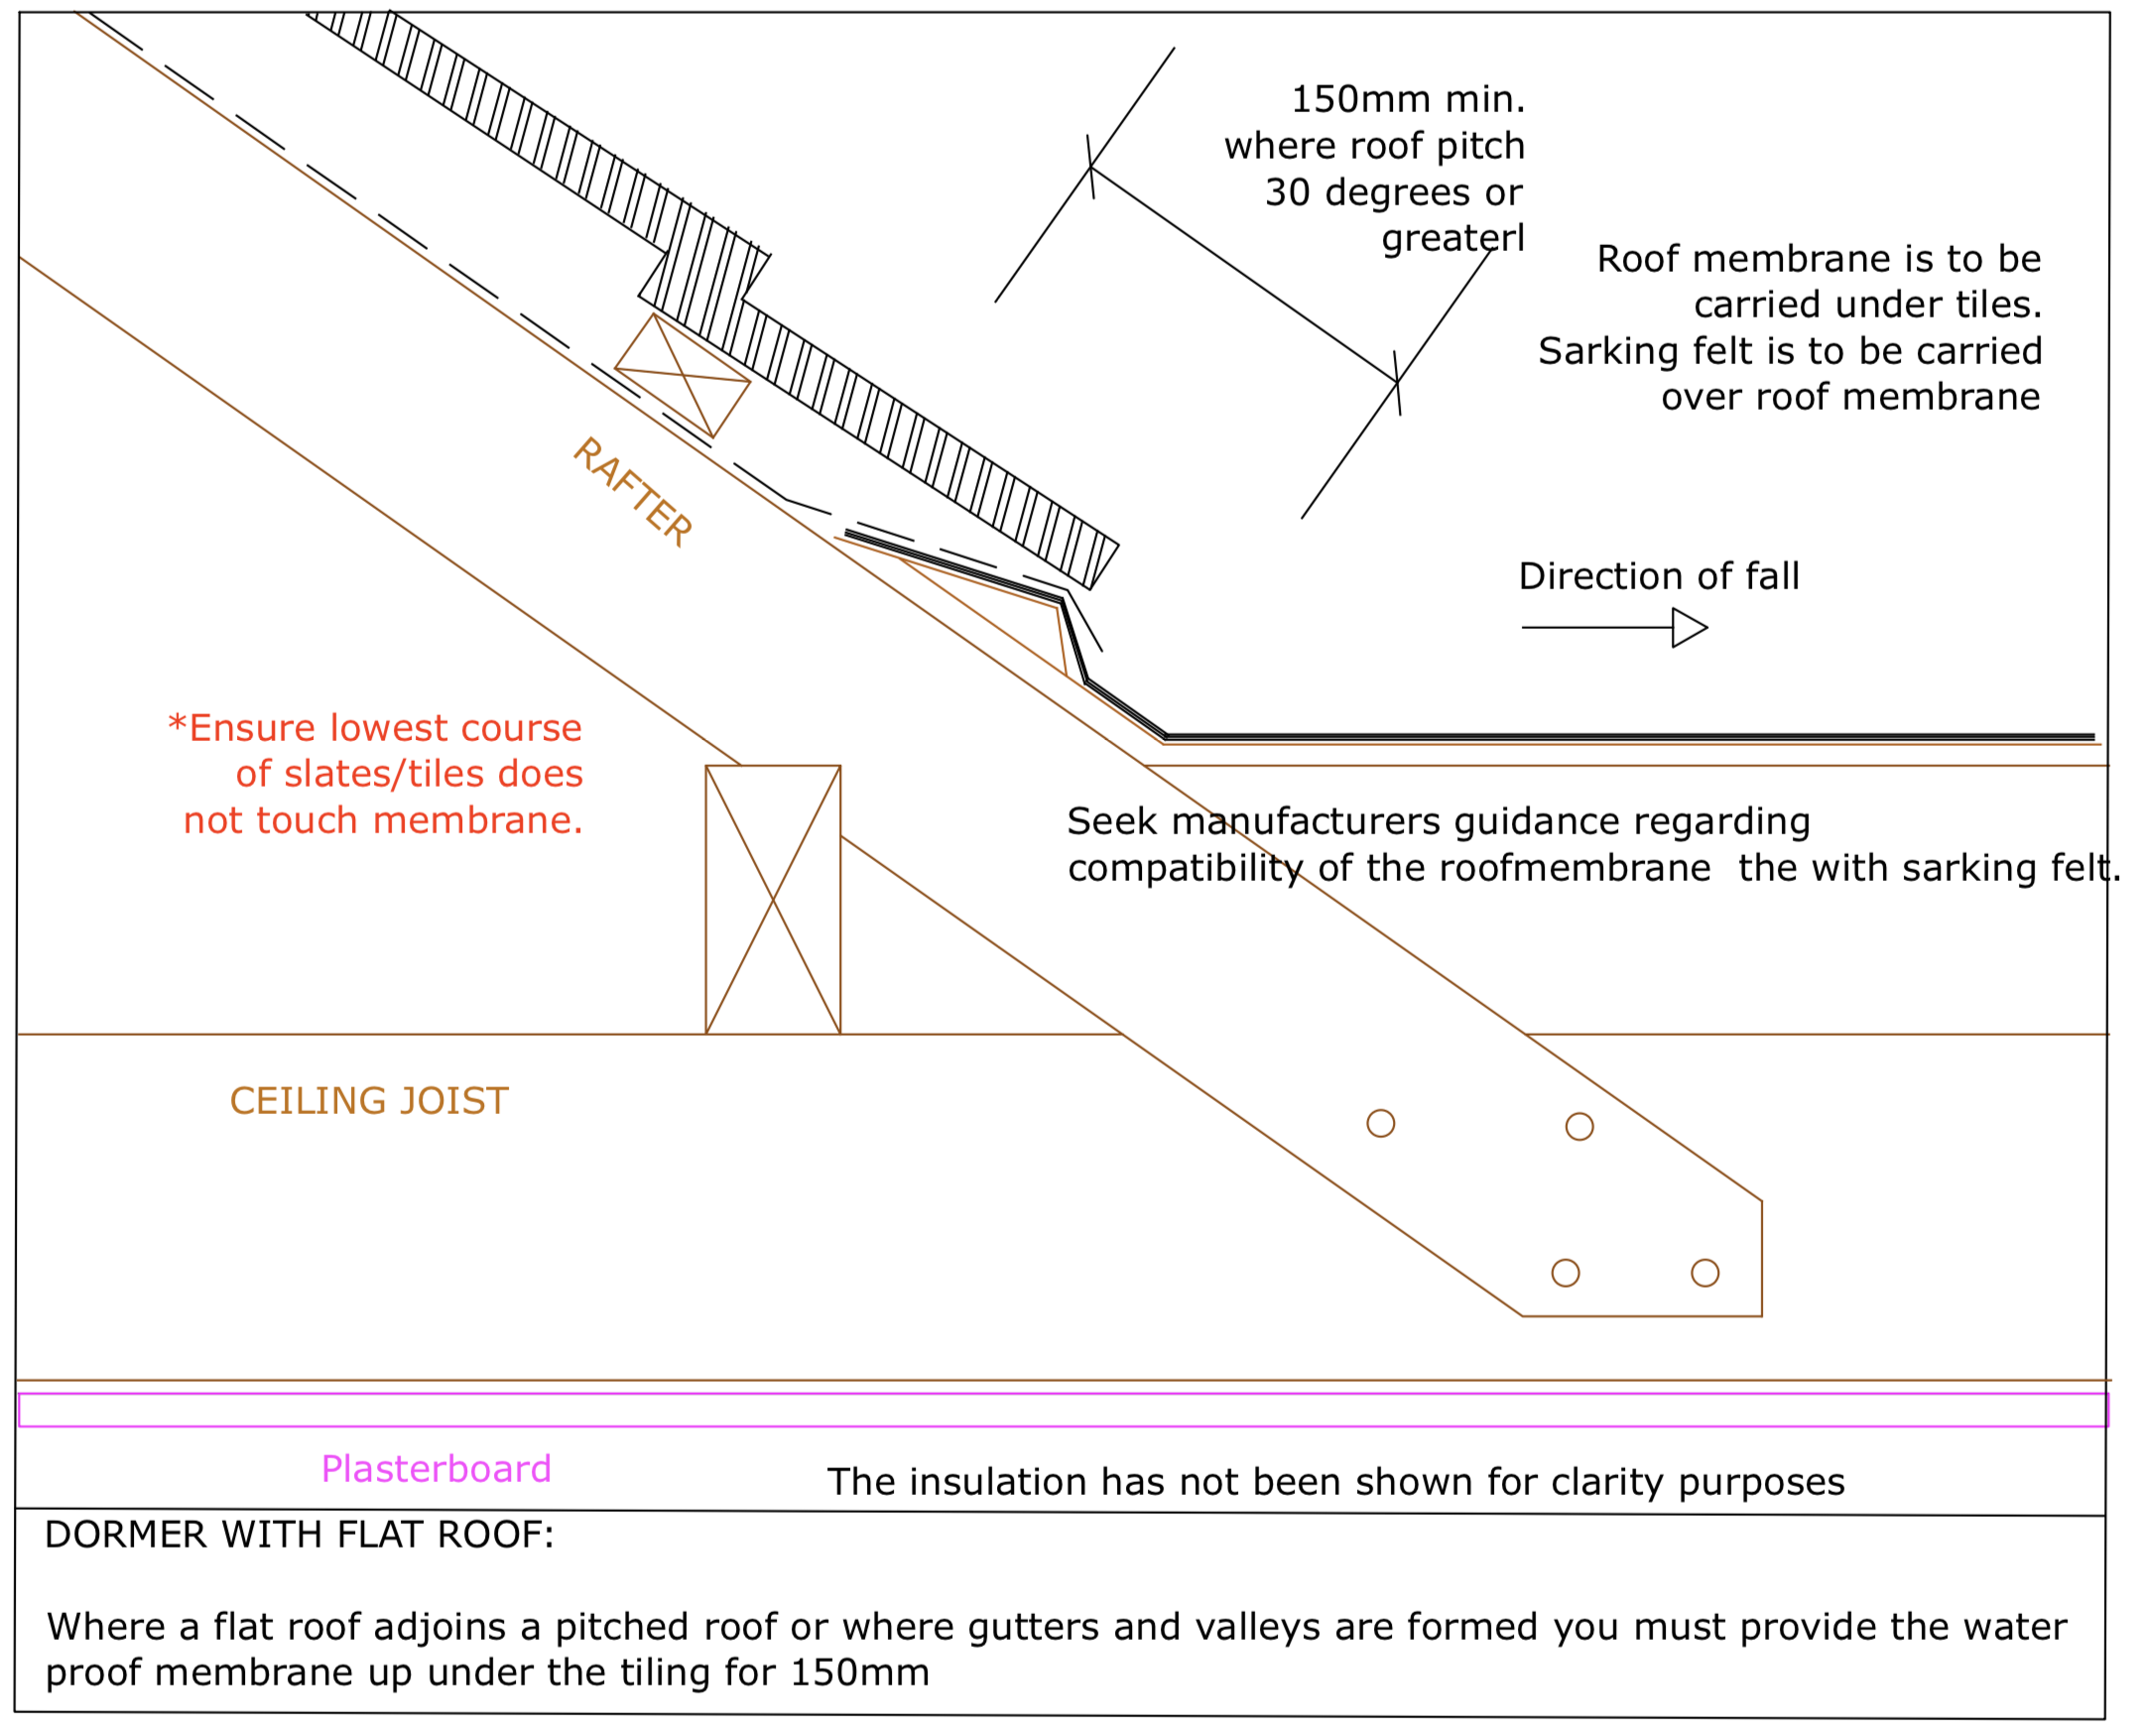 Diagram D53 - Junction of flat roof and pitched roof